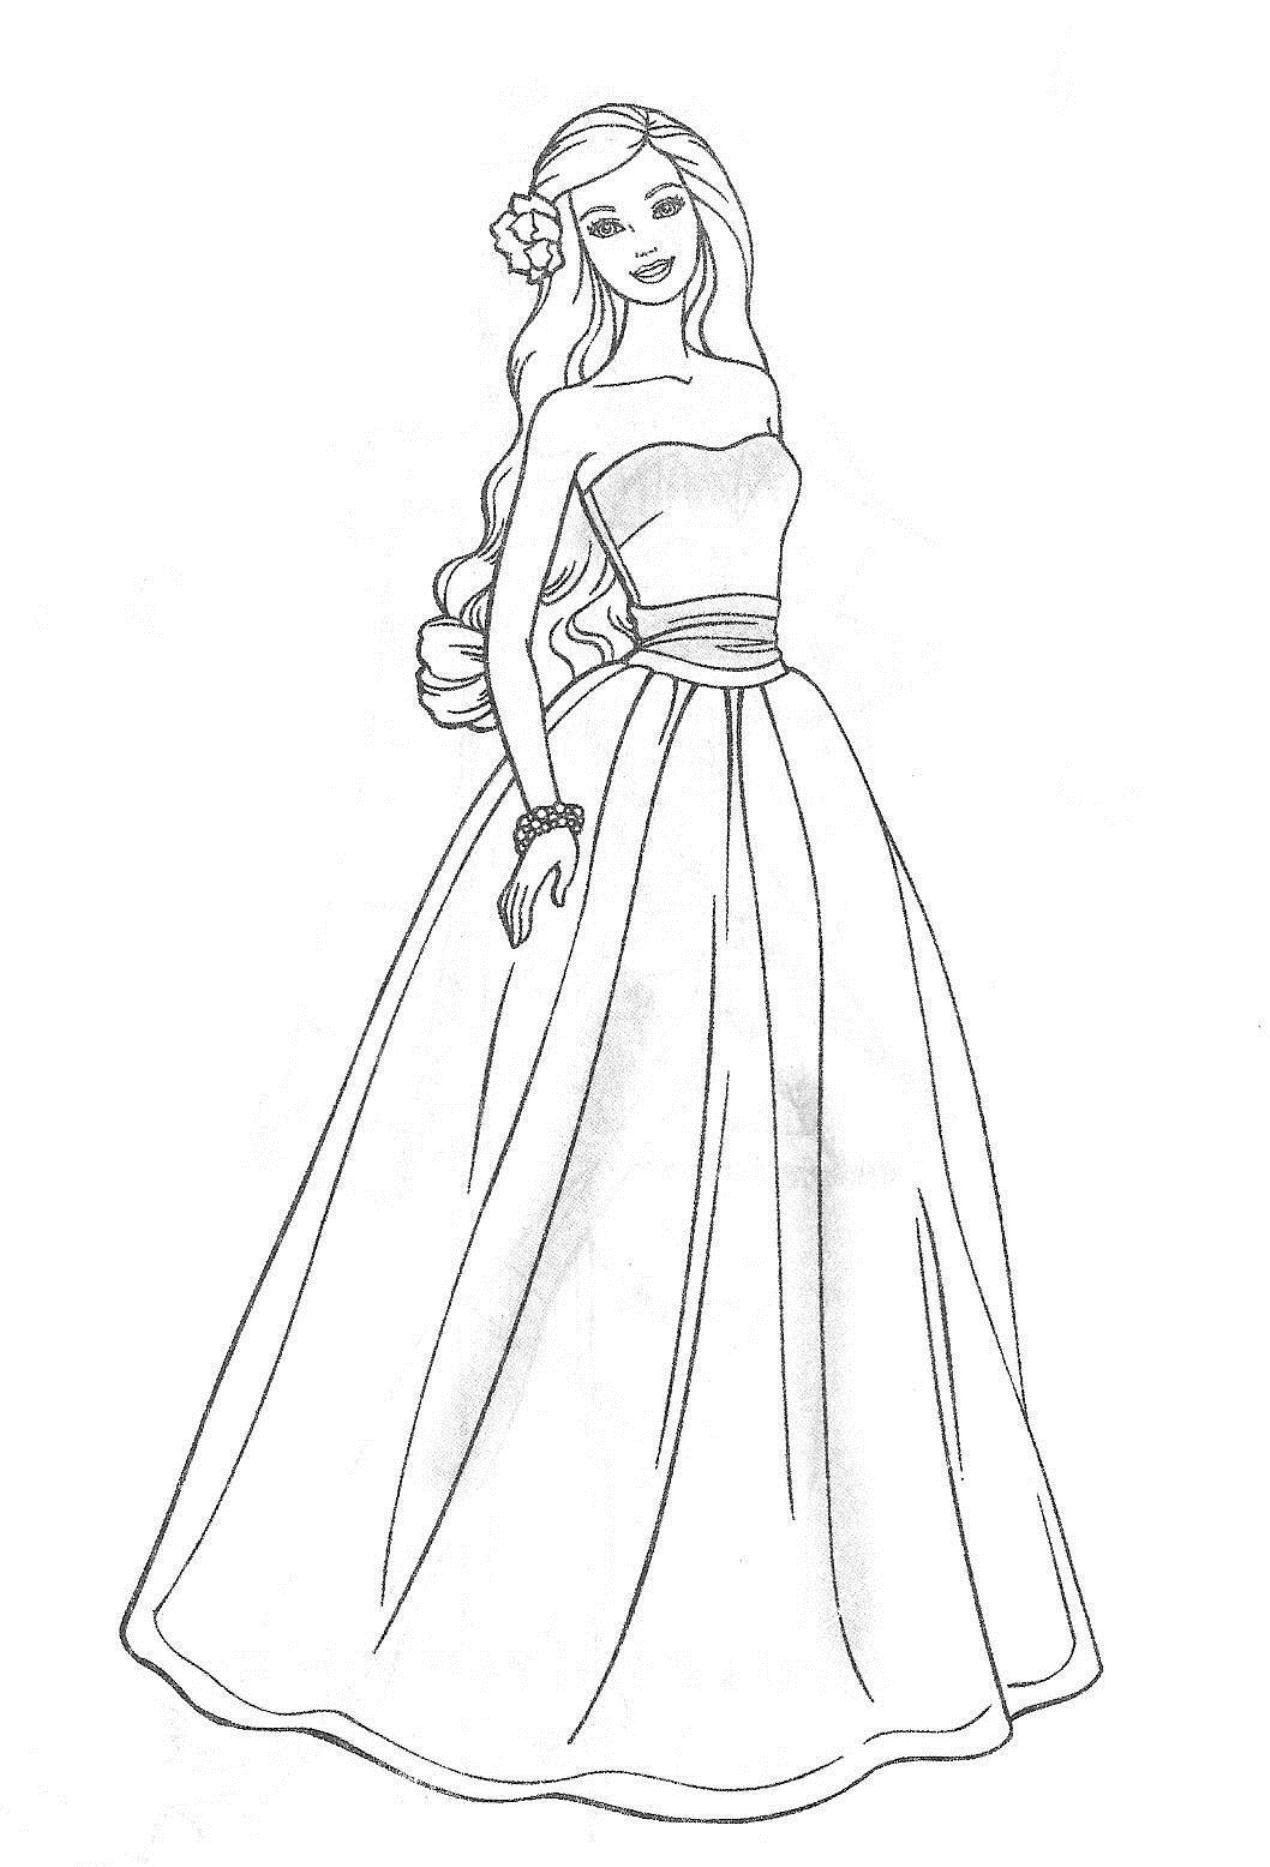 Barbie Princess Printable Coloring Pages - Coloring Nation